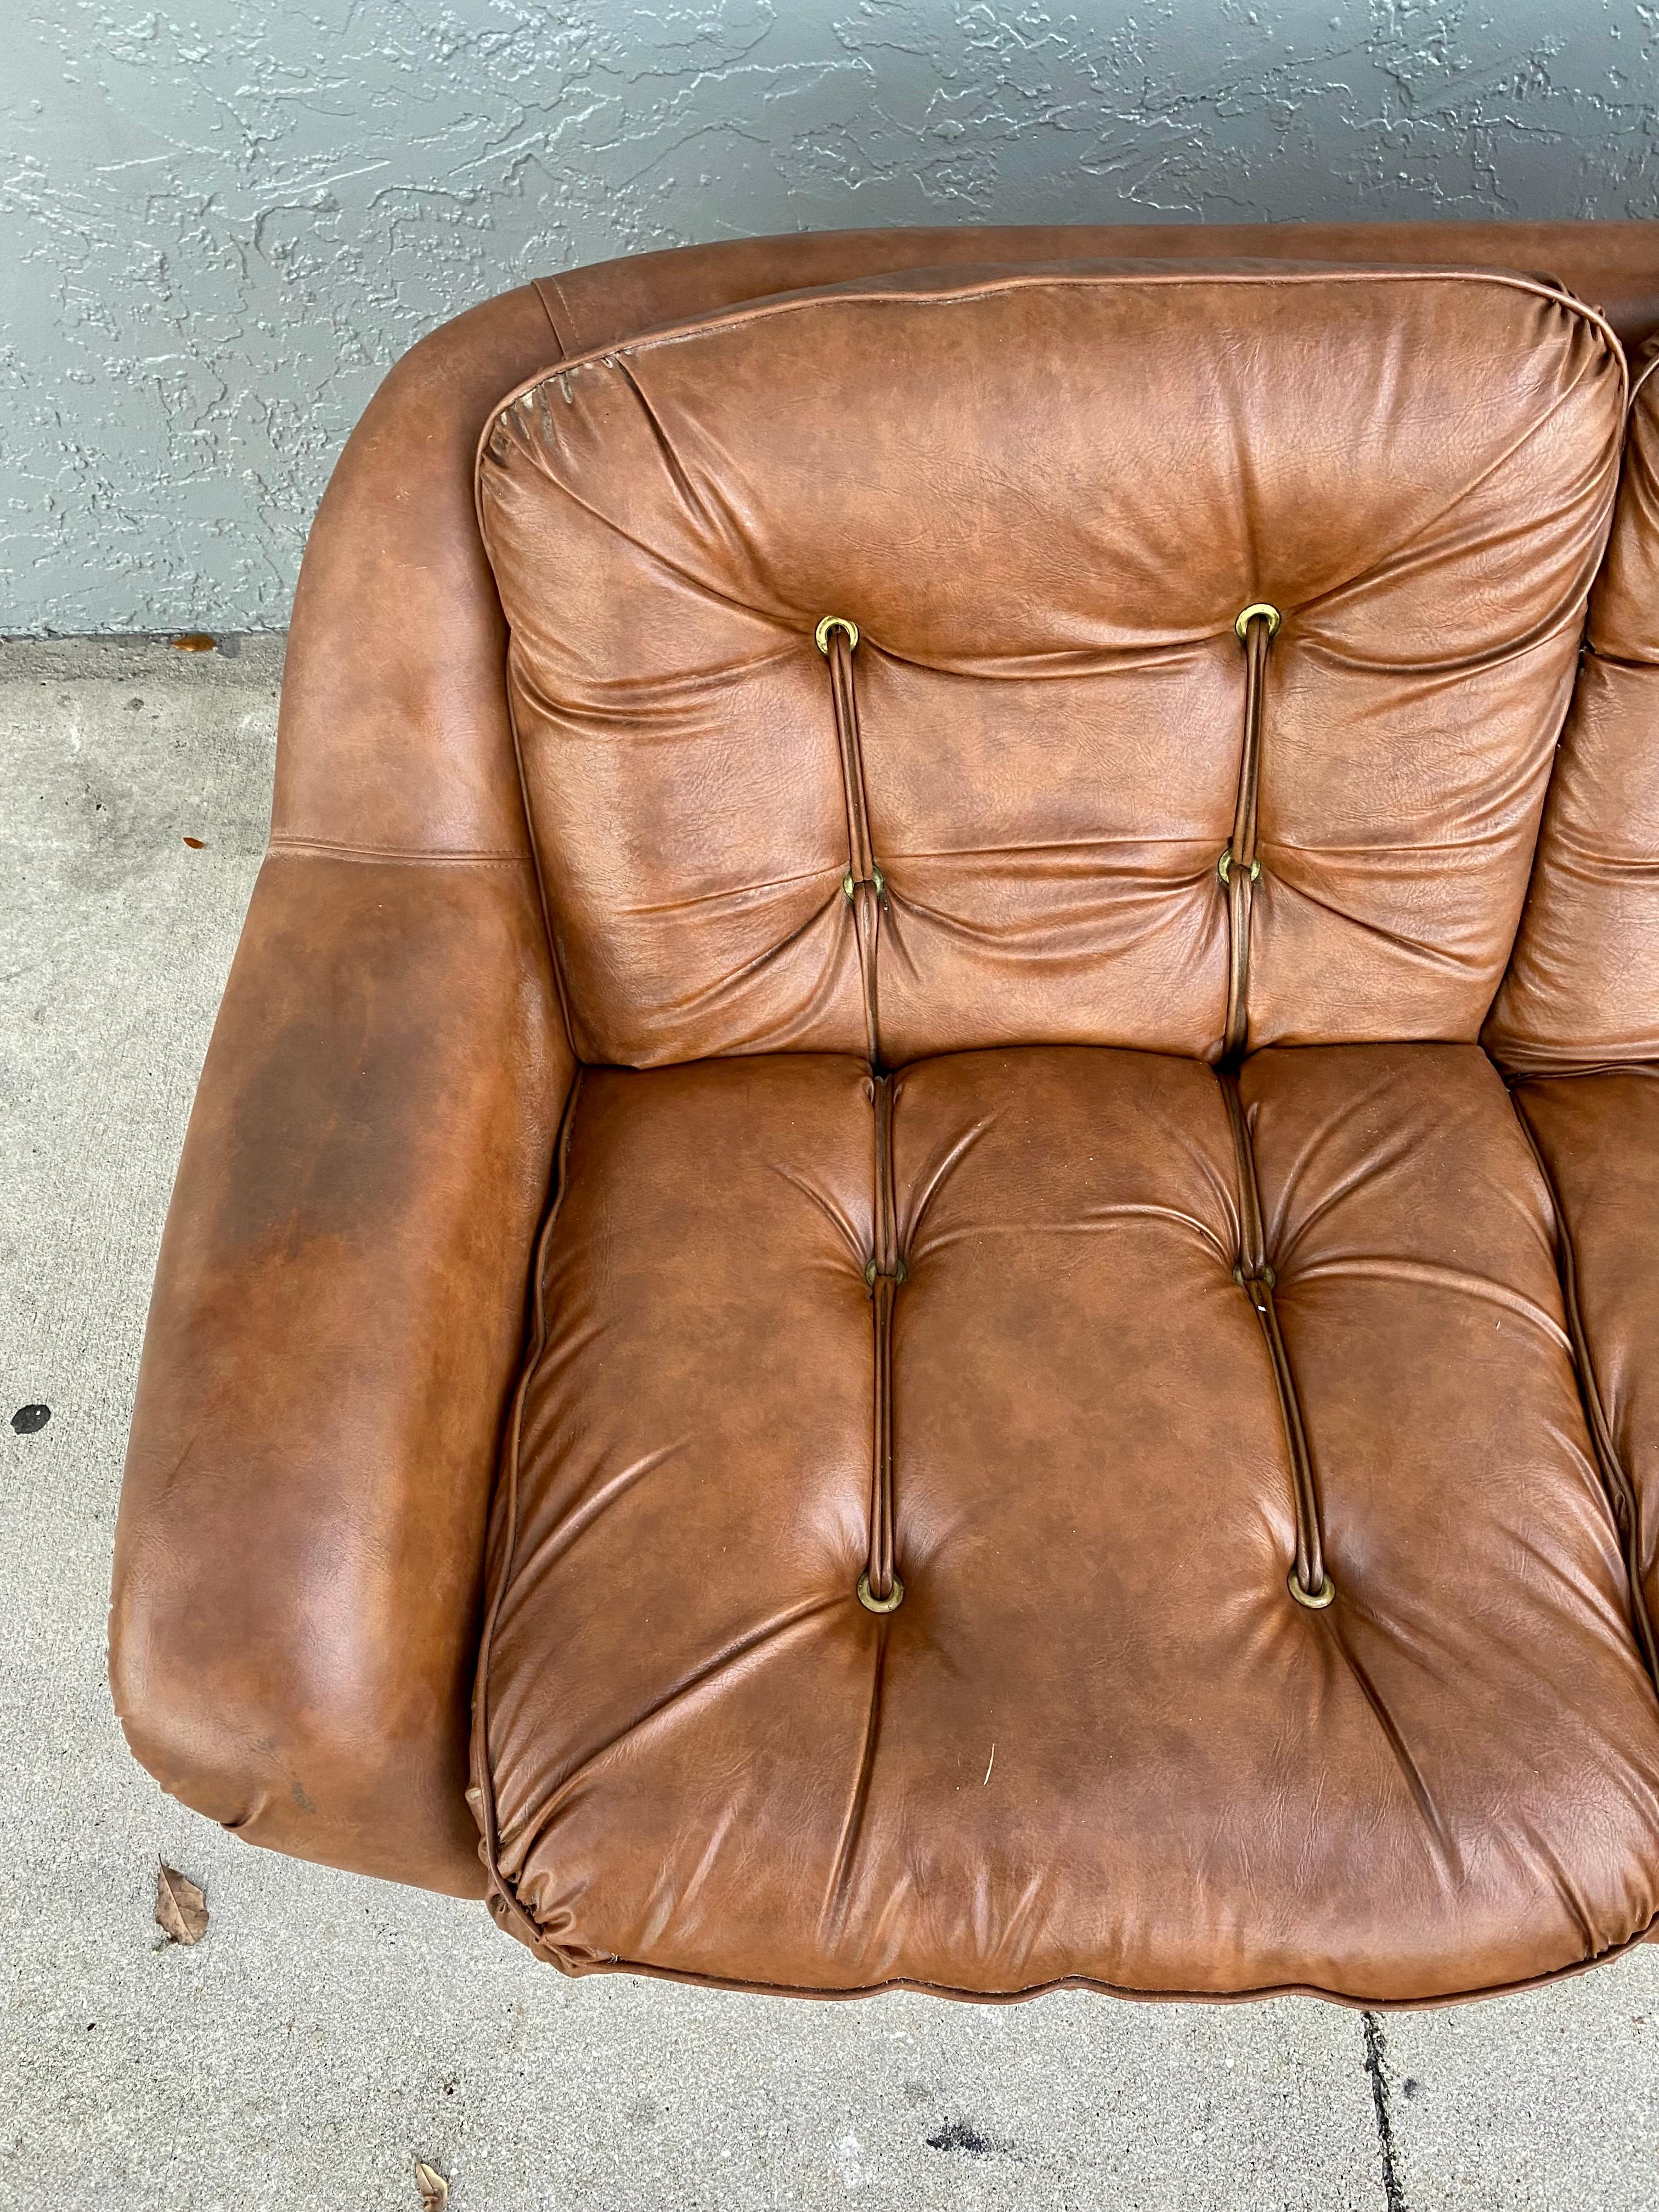 1970s Space Age Baseball Glove Curved Sofa Loveseat For Sale 4